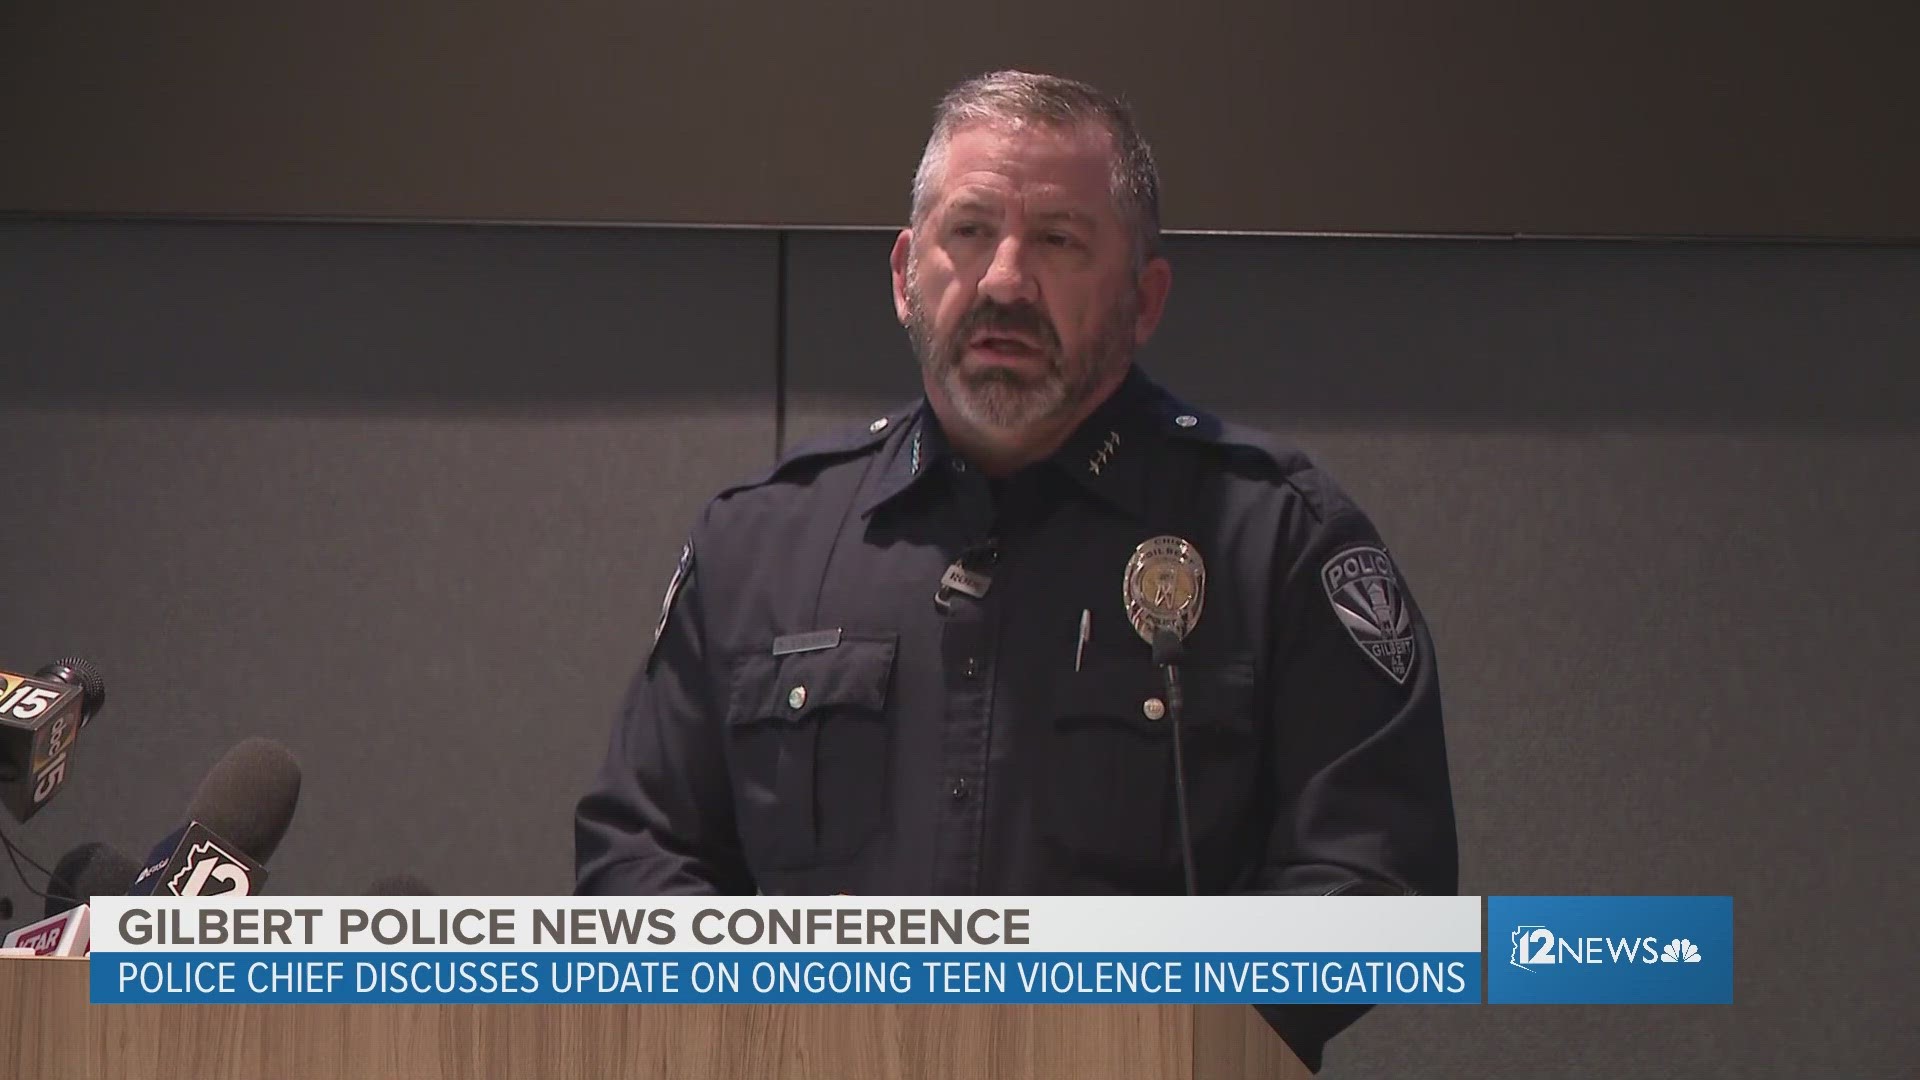 Gilbert Police Chief Michael Soelberg speaks with the media on Jan. 25 to give an update on the ongoing teen violence investigations in the East Valley.